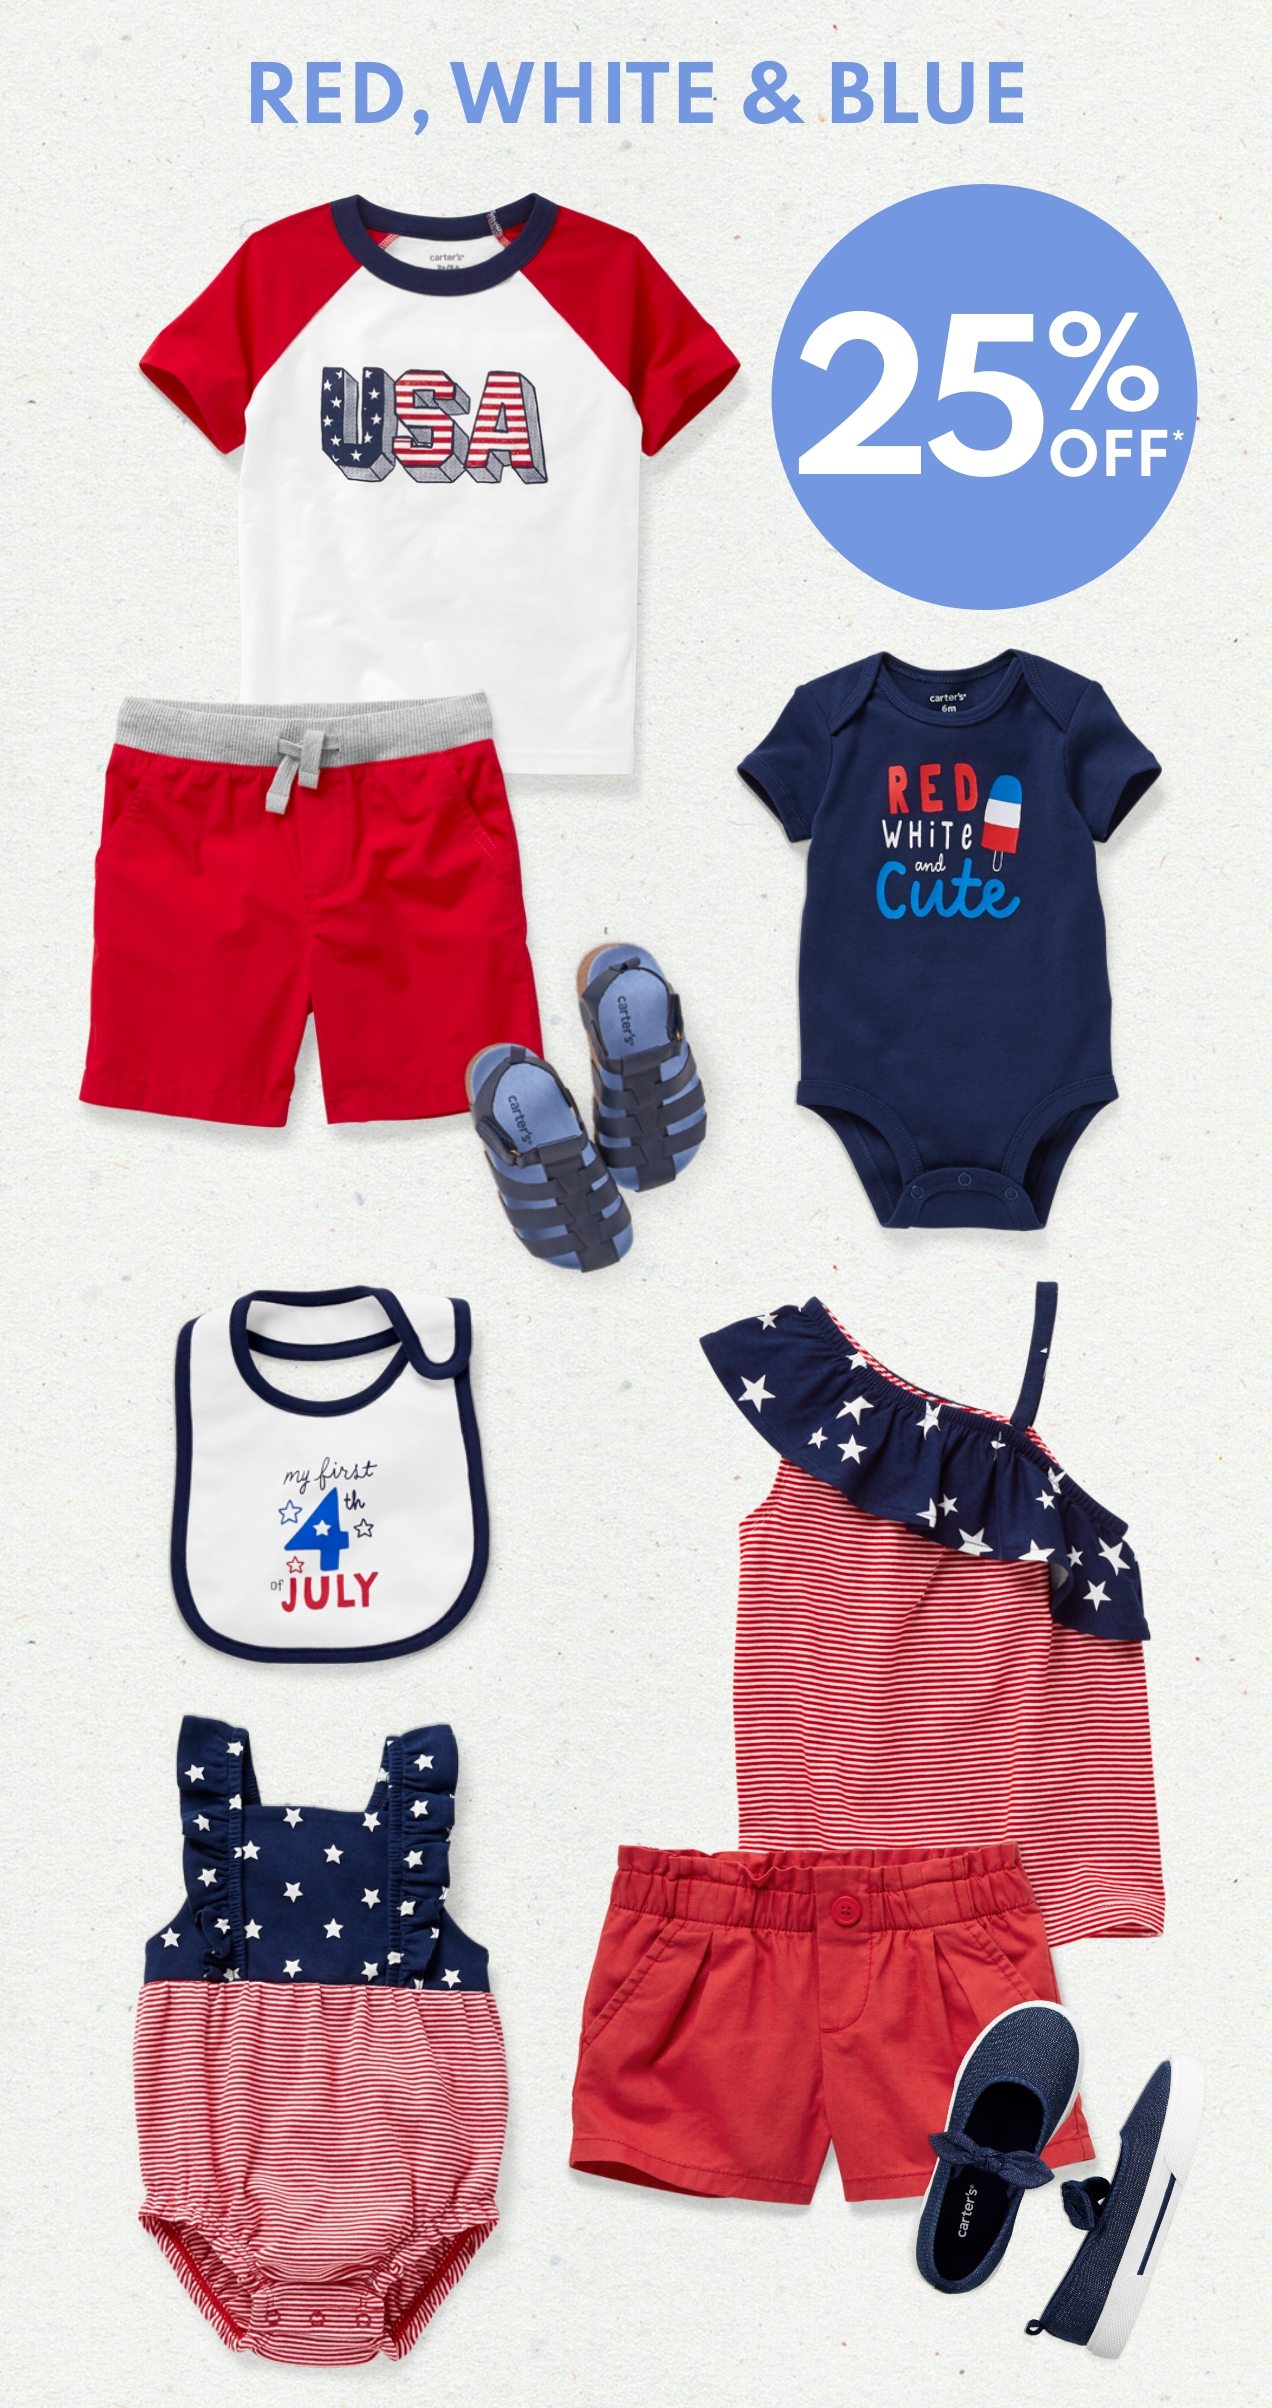 RED, WHITE & BLUE | 25% OFF* 